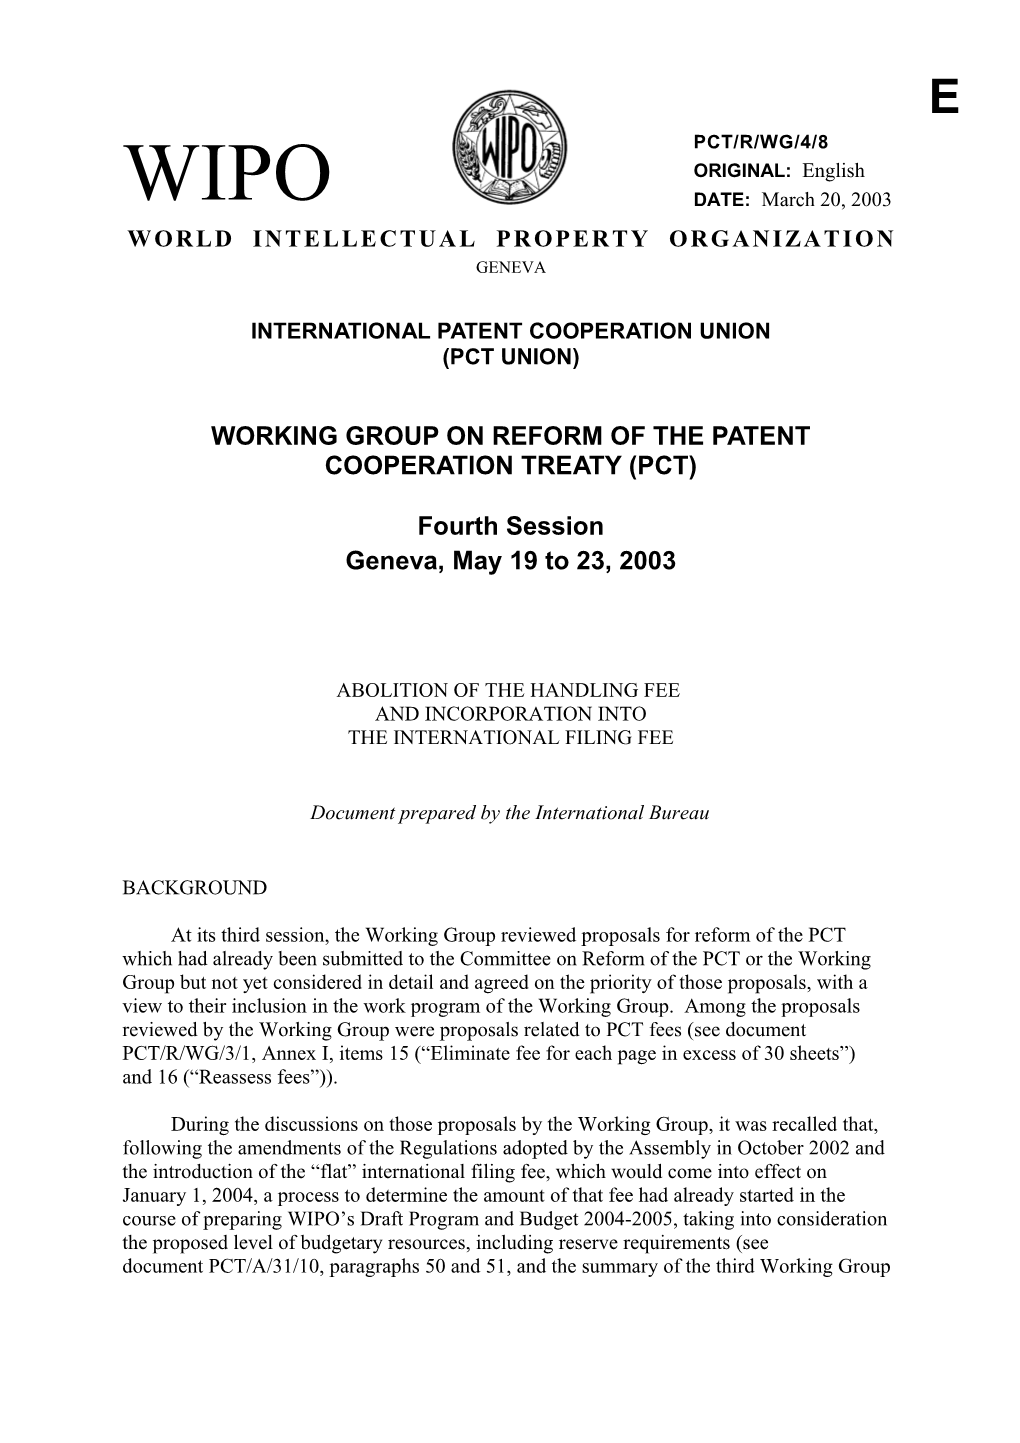 PCT/R/WG/4/8: Abolition of the Handling Fee and Incorporation Into the International Filing Fee